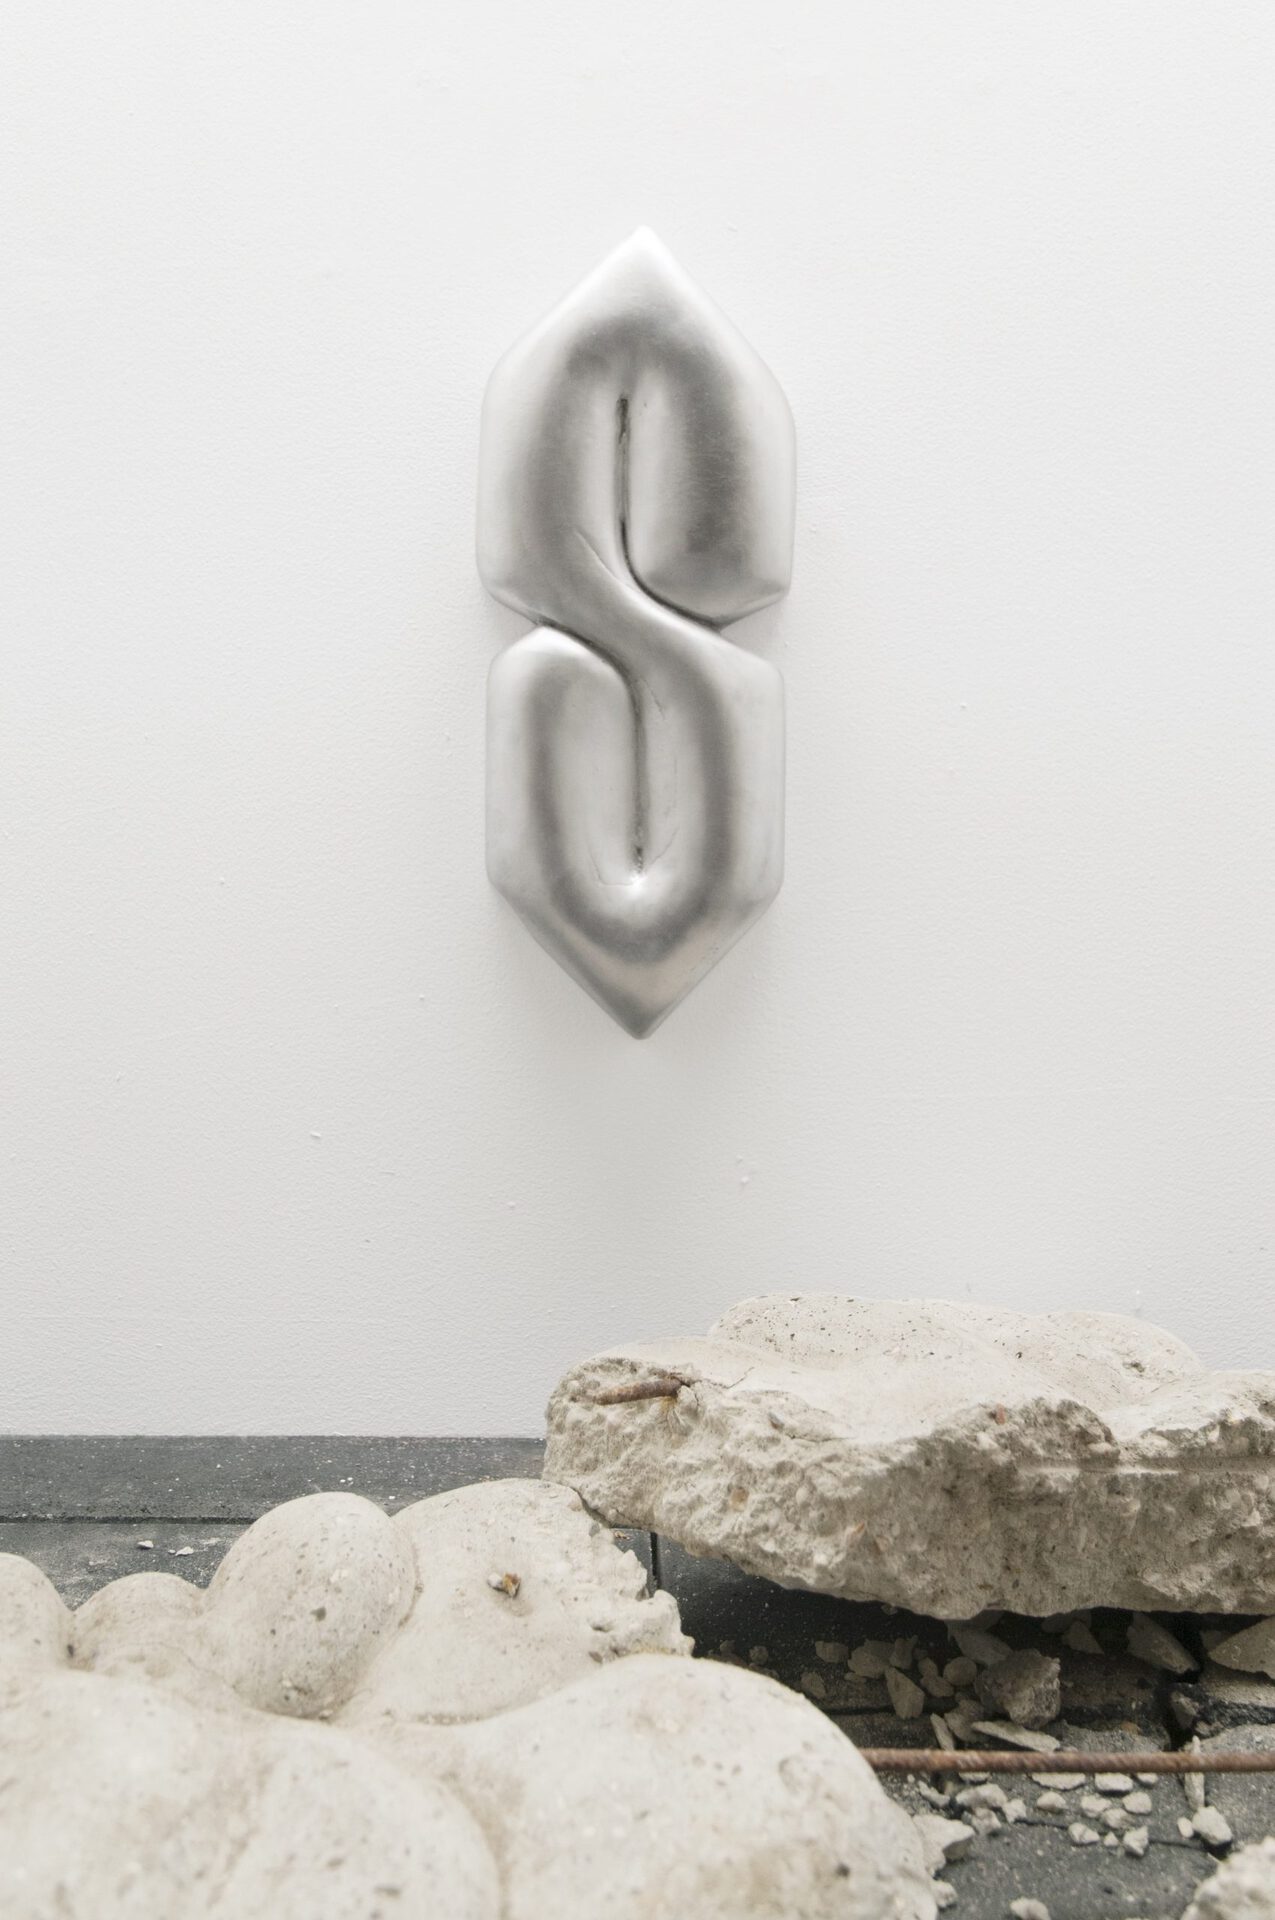 Finn Wagner, cry if you see me, 2021, concrete, steel, 120x95x40